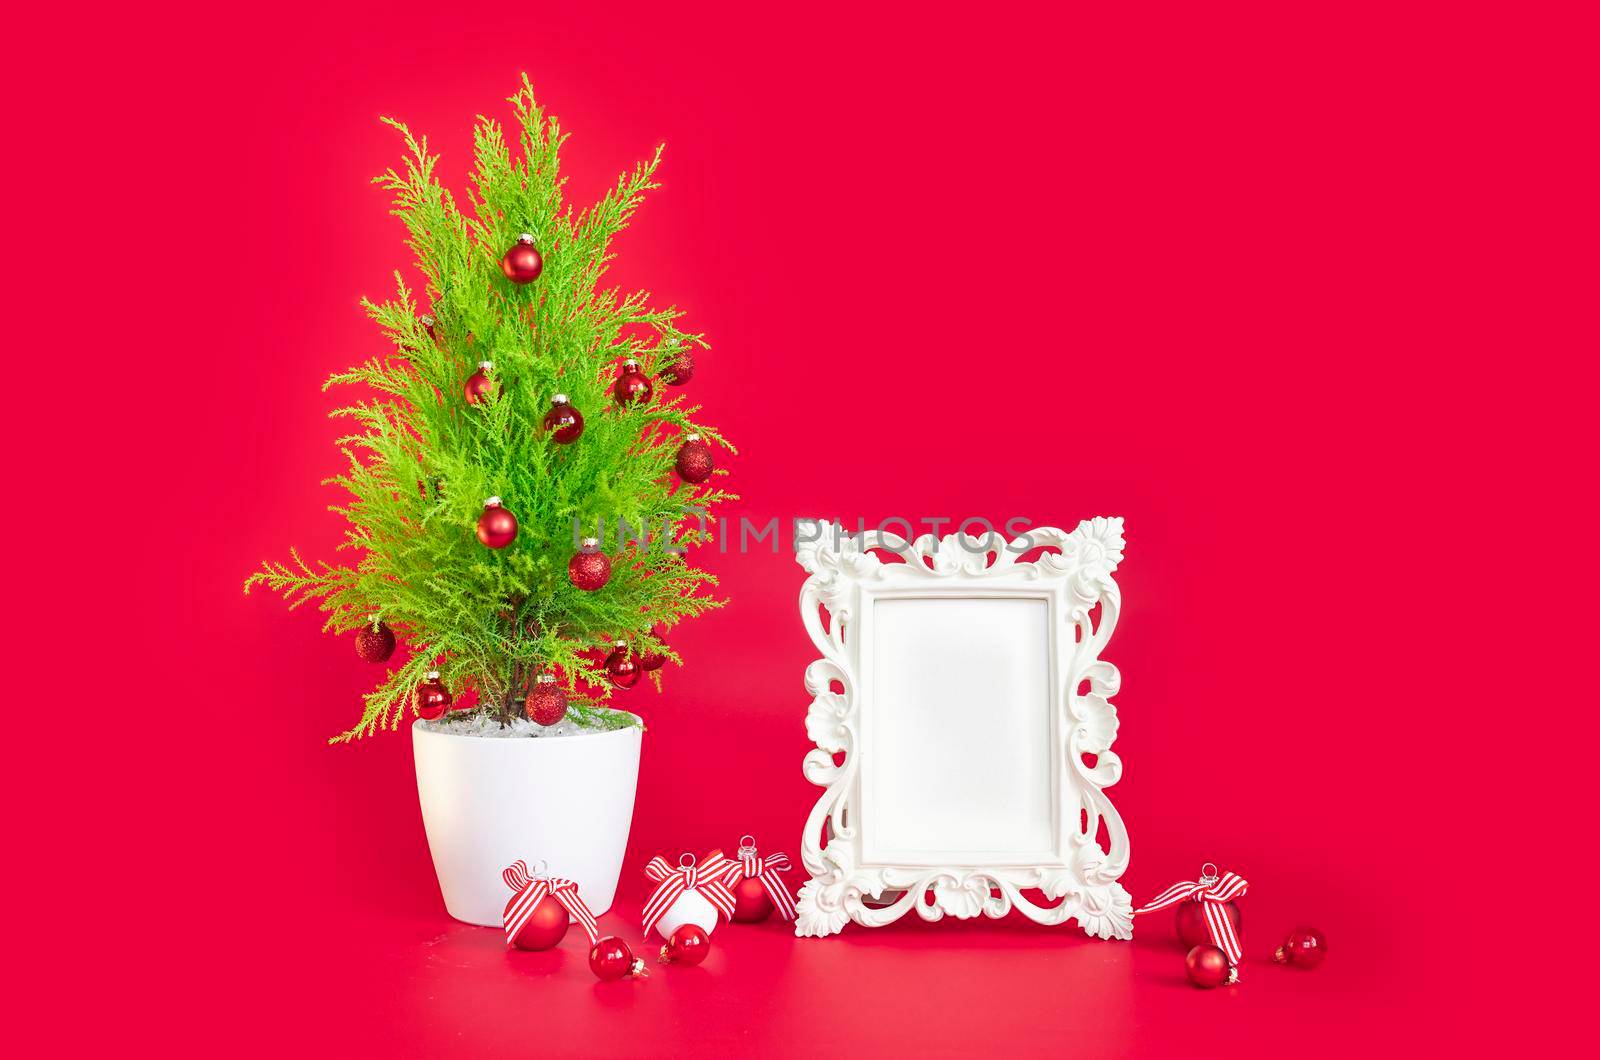 New Year's mockup, on a red background a Christmas tree and a frame for text